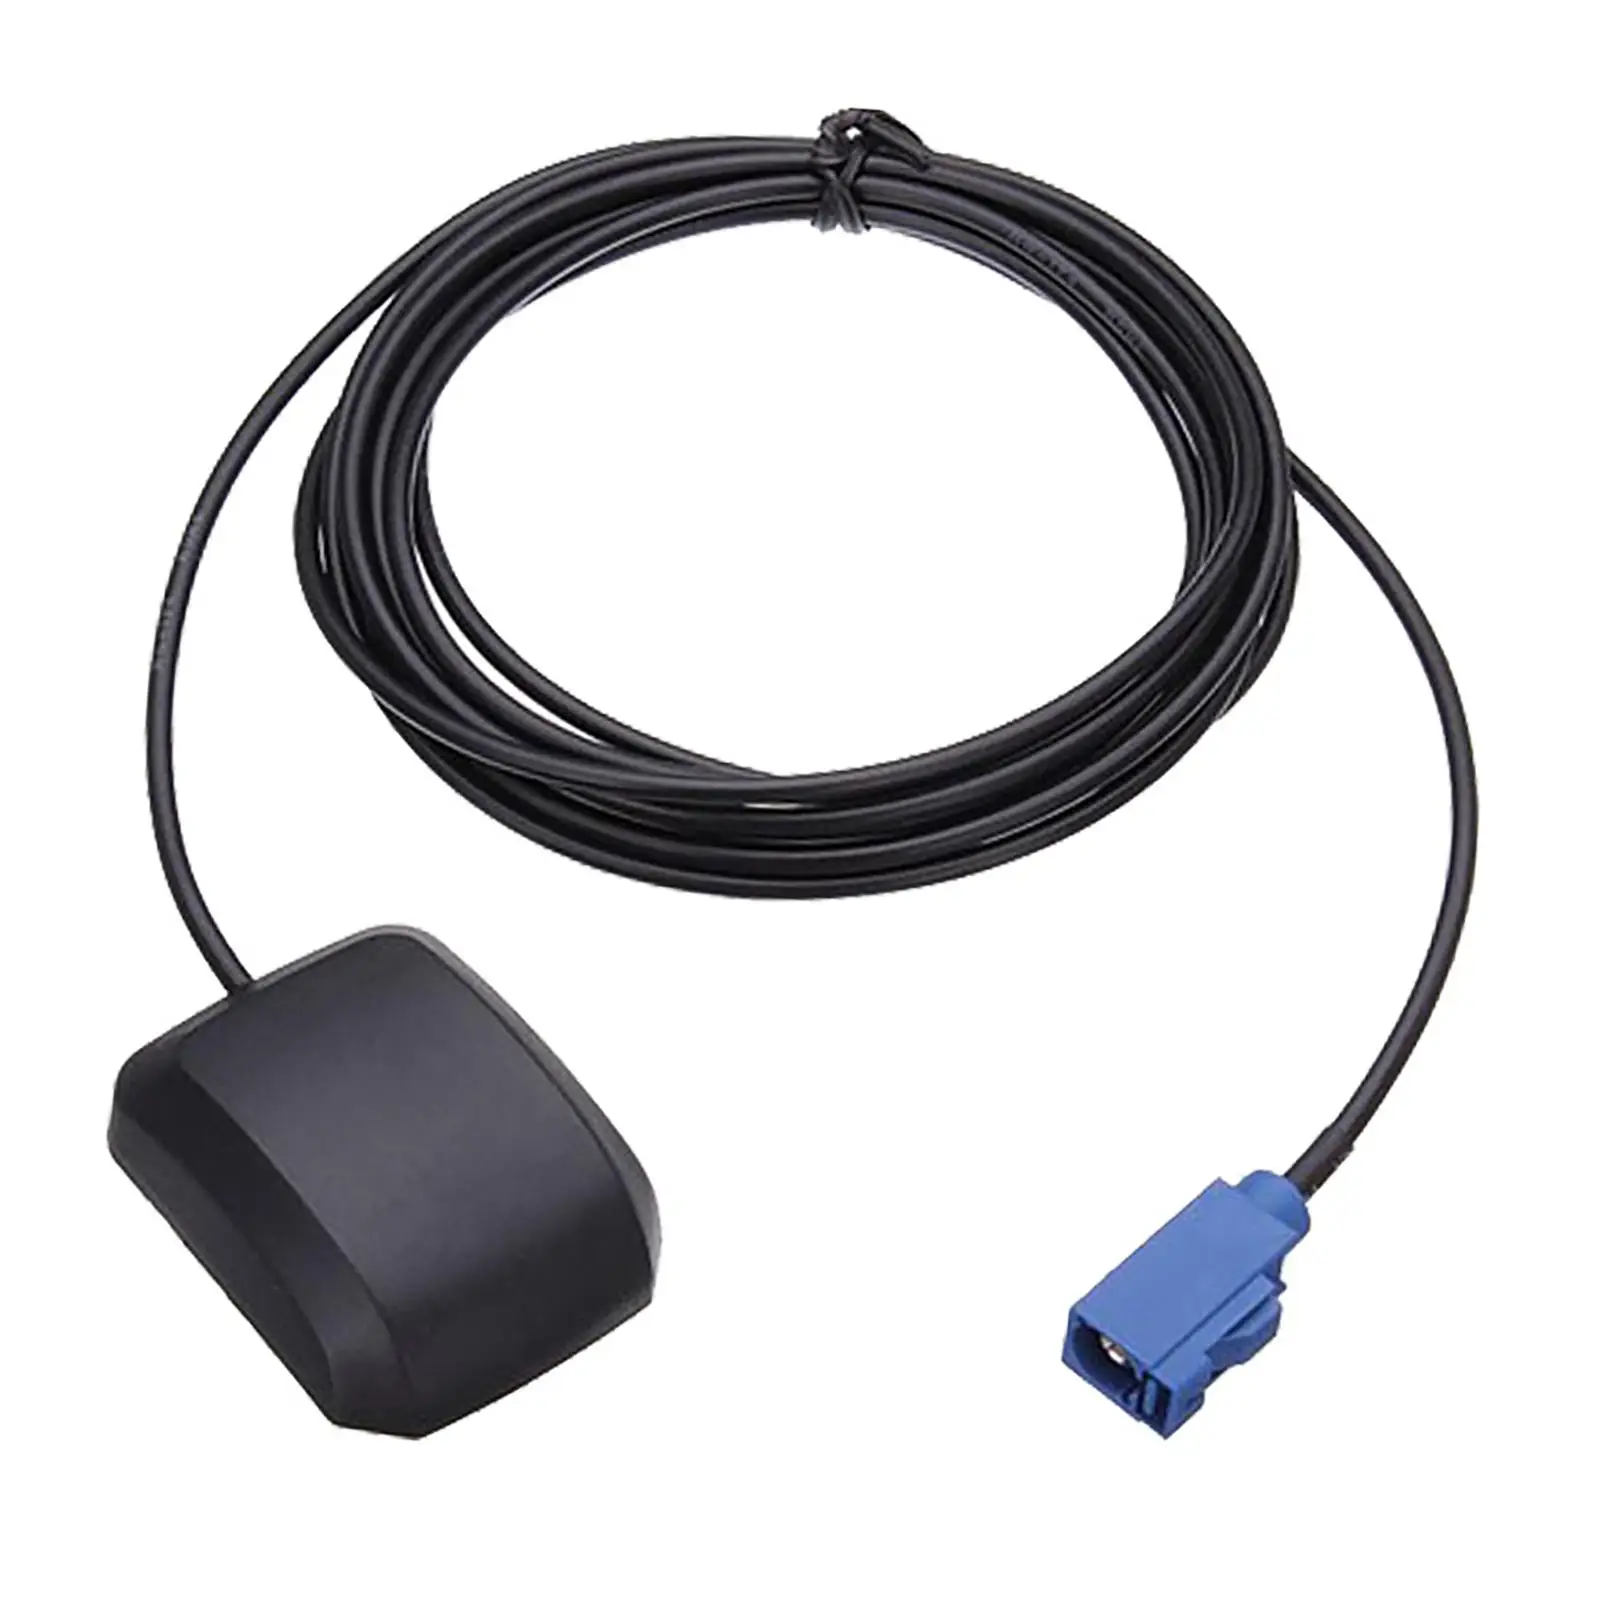 Vehicle Active Navigation with Male Connector for Car Stereo